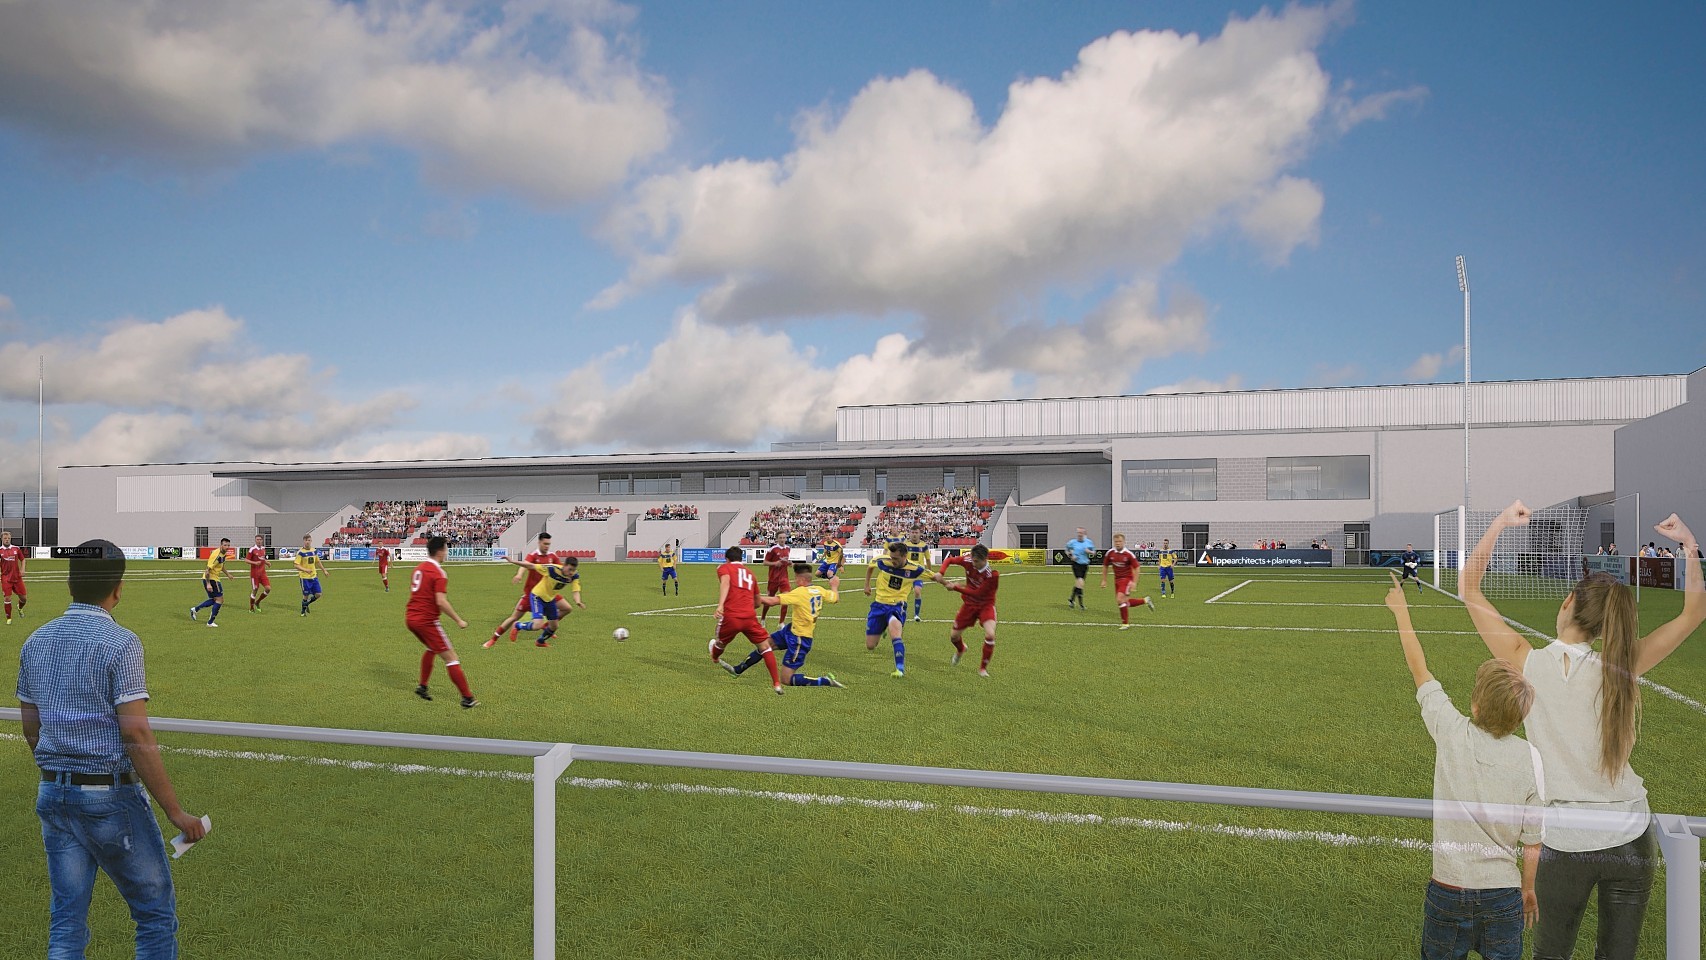 The Inverurie Loco Works FC grounds at the Garioch Sports and Community Centre